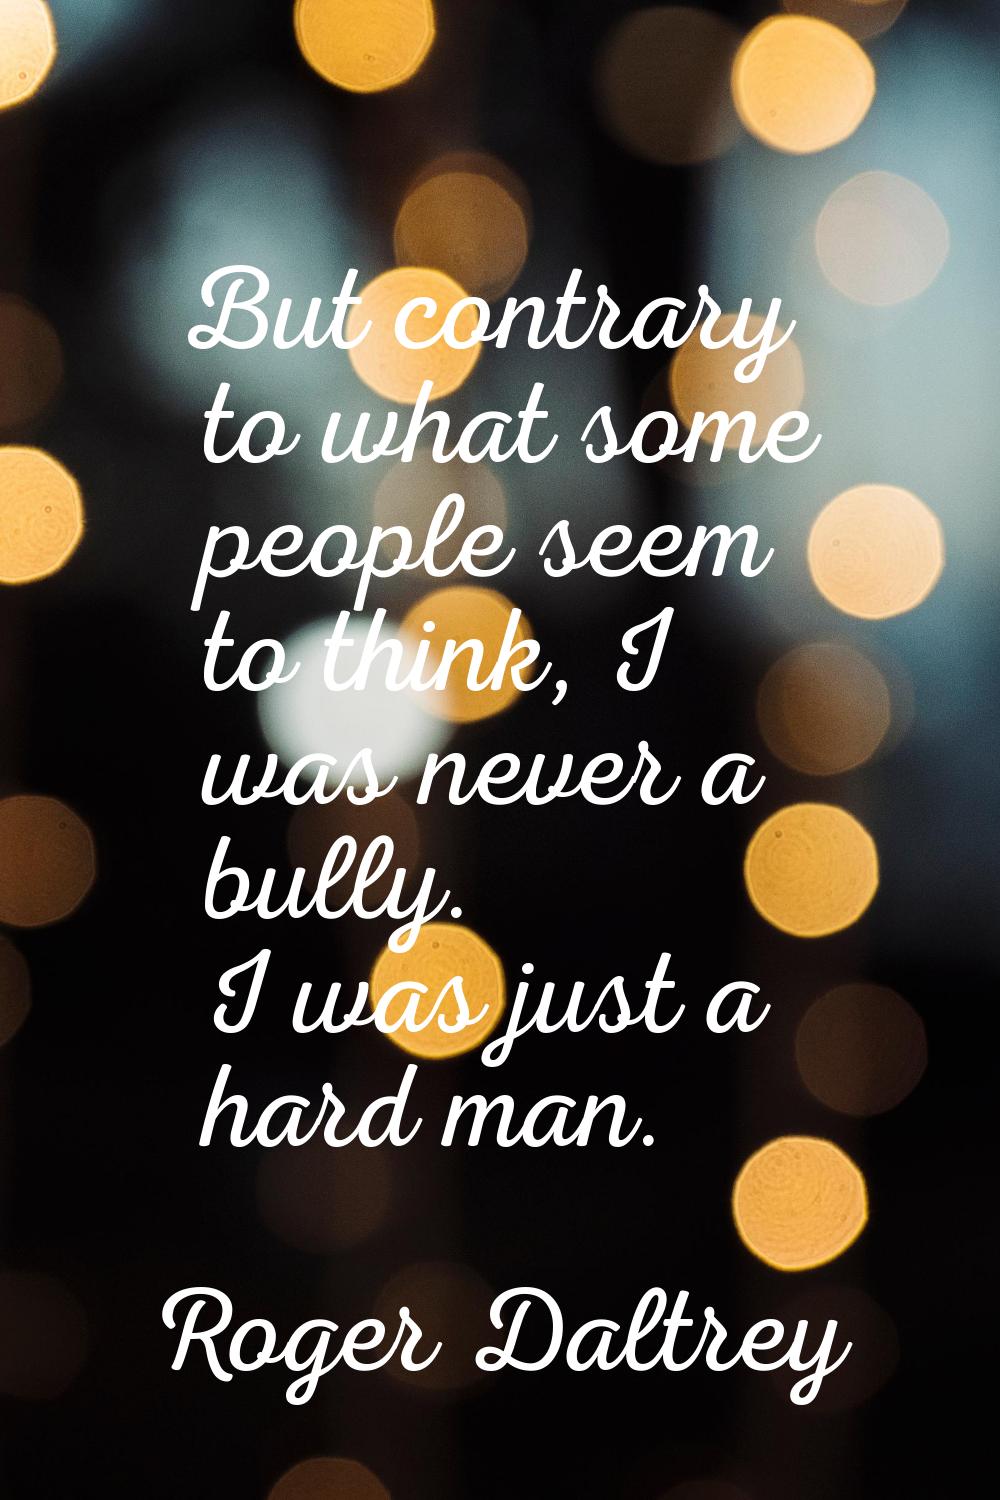 But contrary to what some people seem to think, I was never a bully. I was just a hard man.